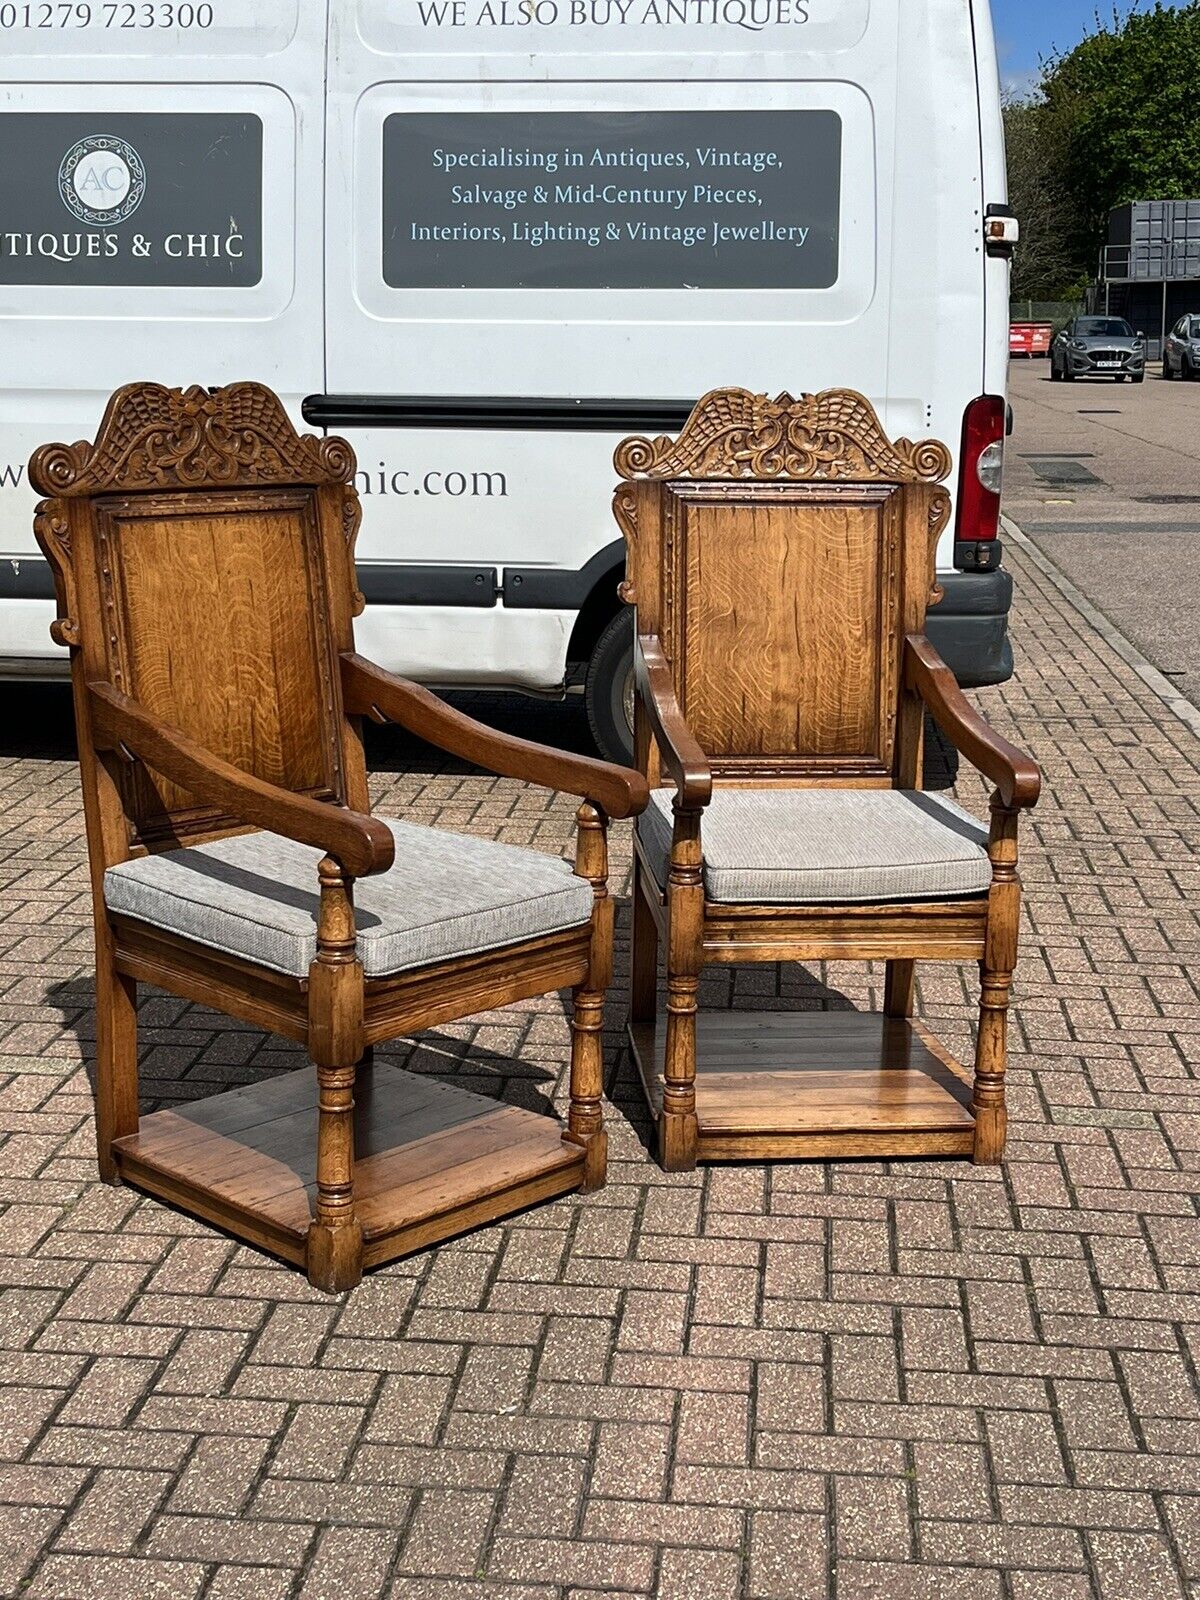 Oak Wainscot Chairs. Superb Carved Decoration.